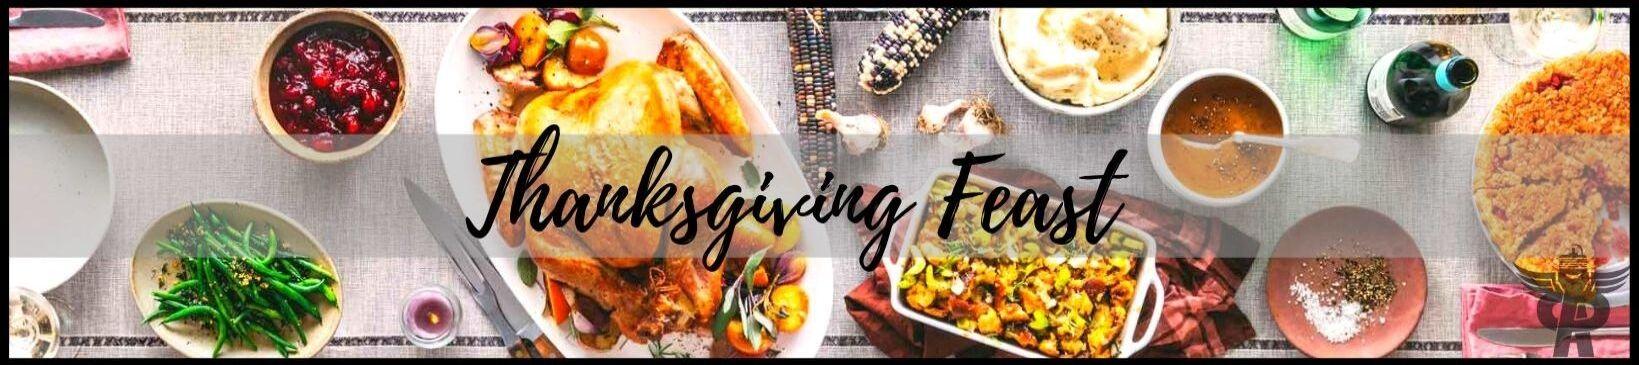 Celebration Of The Thanksgiving Day